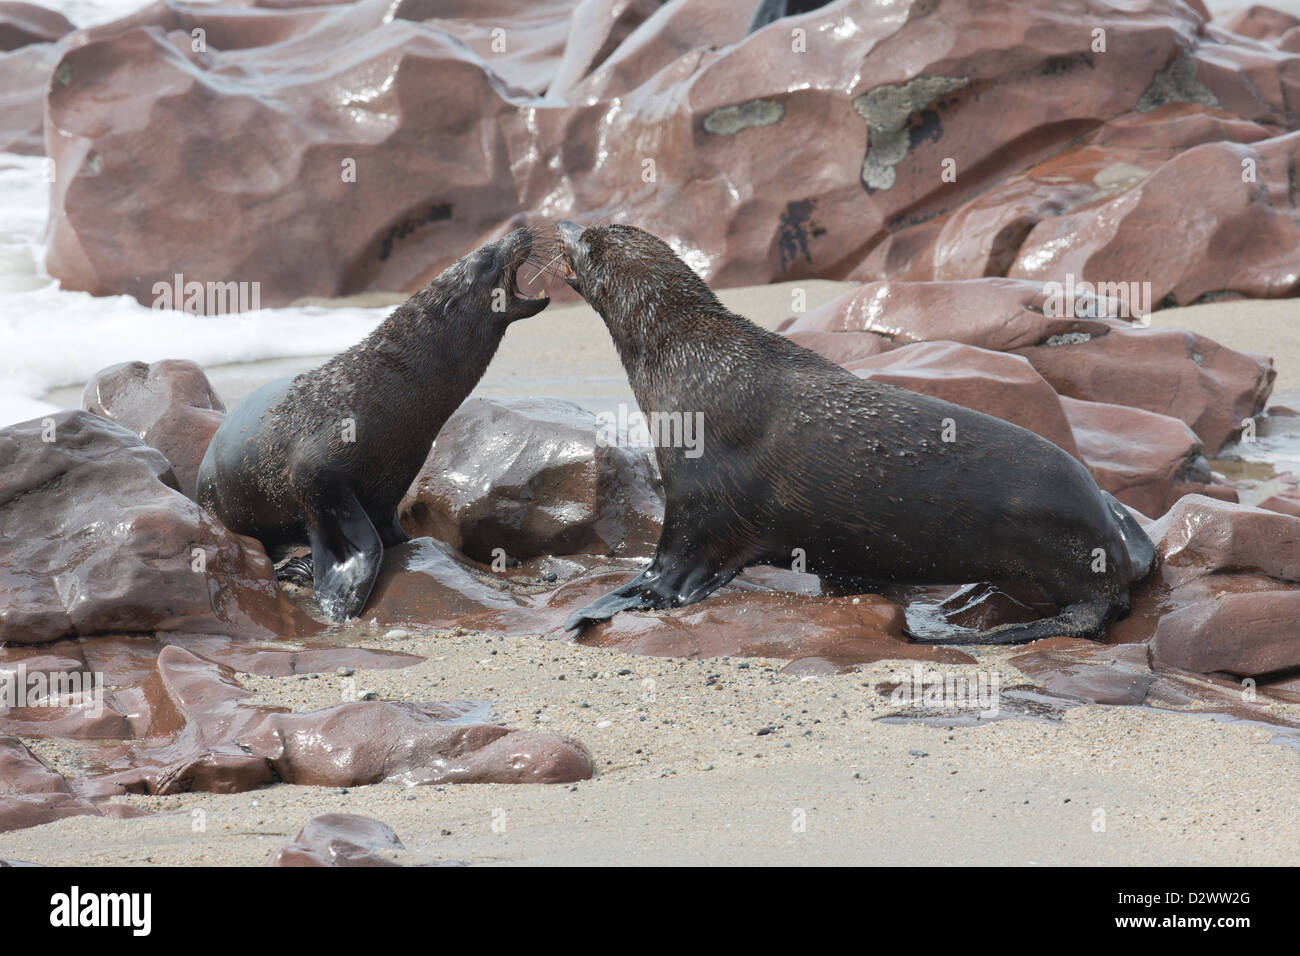 Squabbling Cape Fur Seals at Cape Cross in Namibia Stock Photo